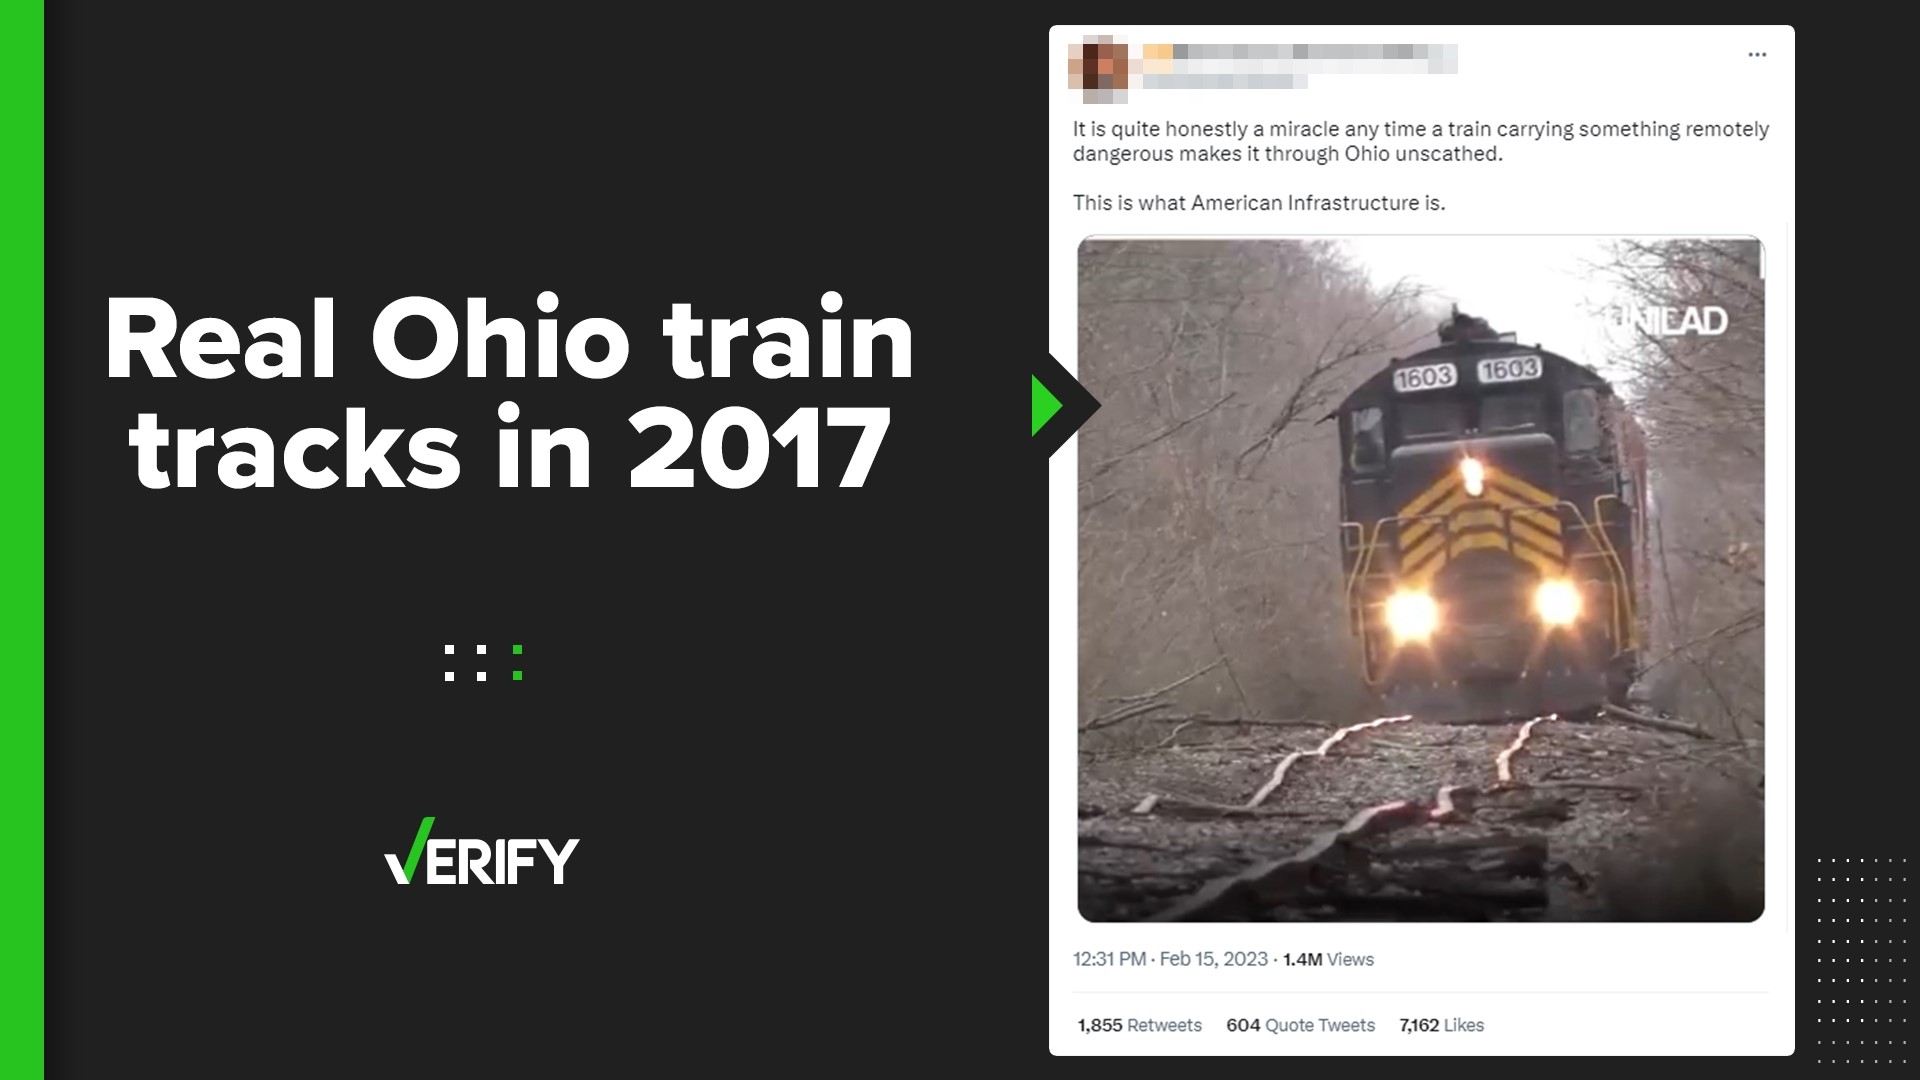 A video shared after the East Palestine derailment does show a train navigating “bendy” tracks in Ohio. The video is from 2017 and the tracks have been repaired.